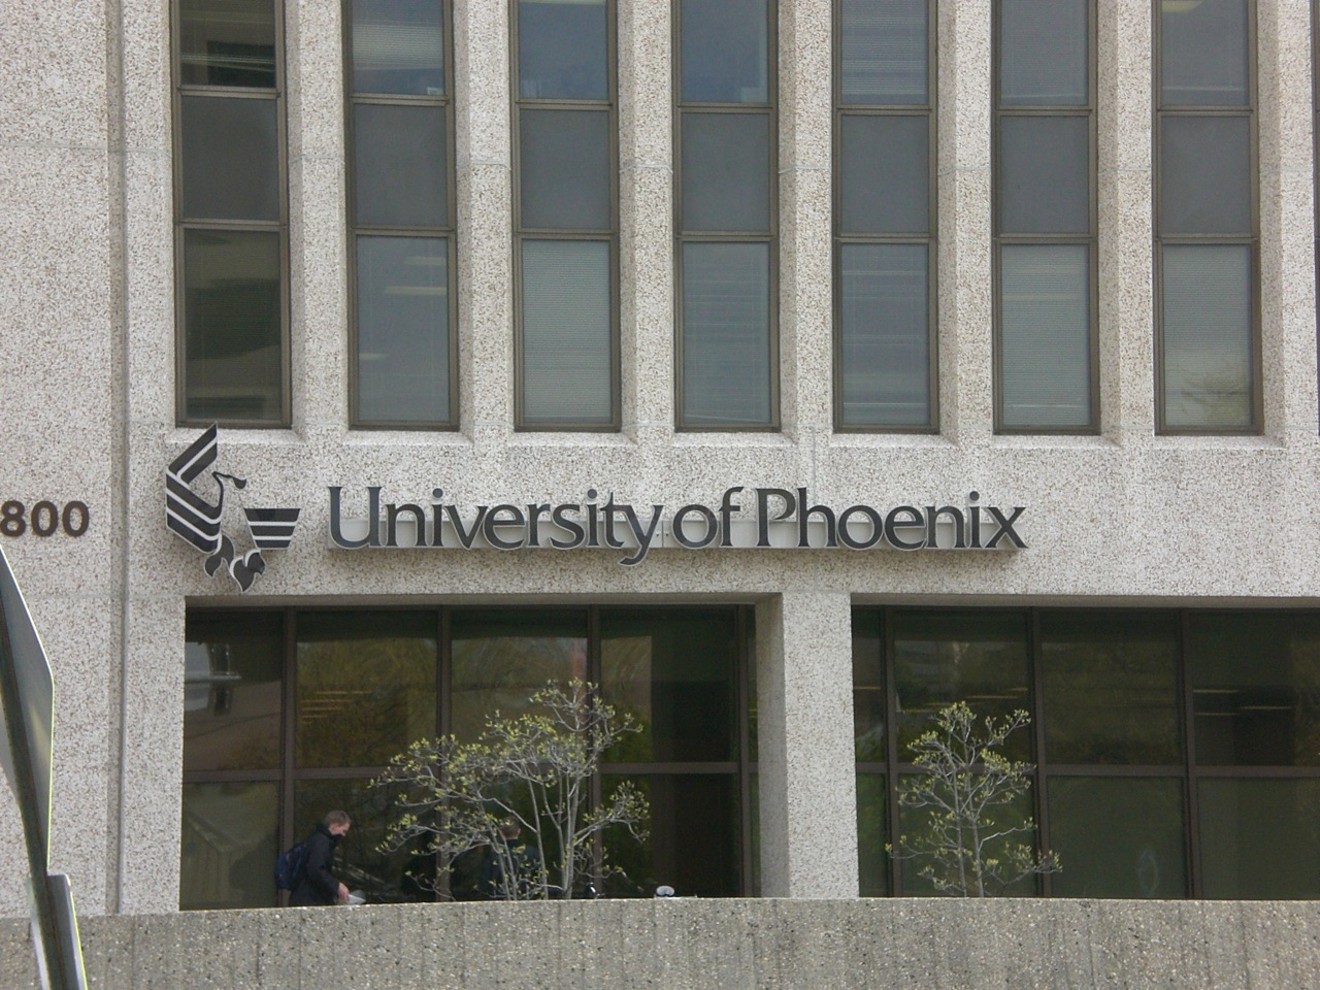 Employees say the University of Phoenix plans to stop enrolling new students at physical campuses in states across the country.